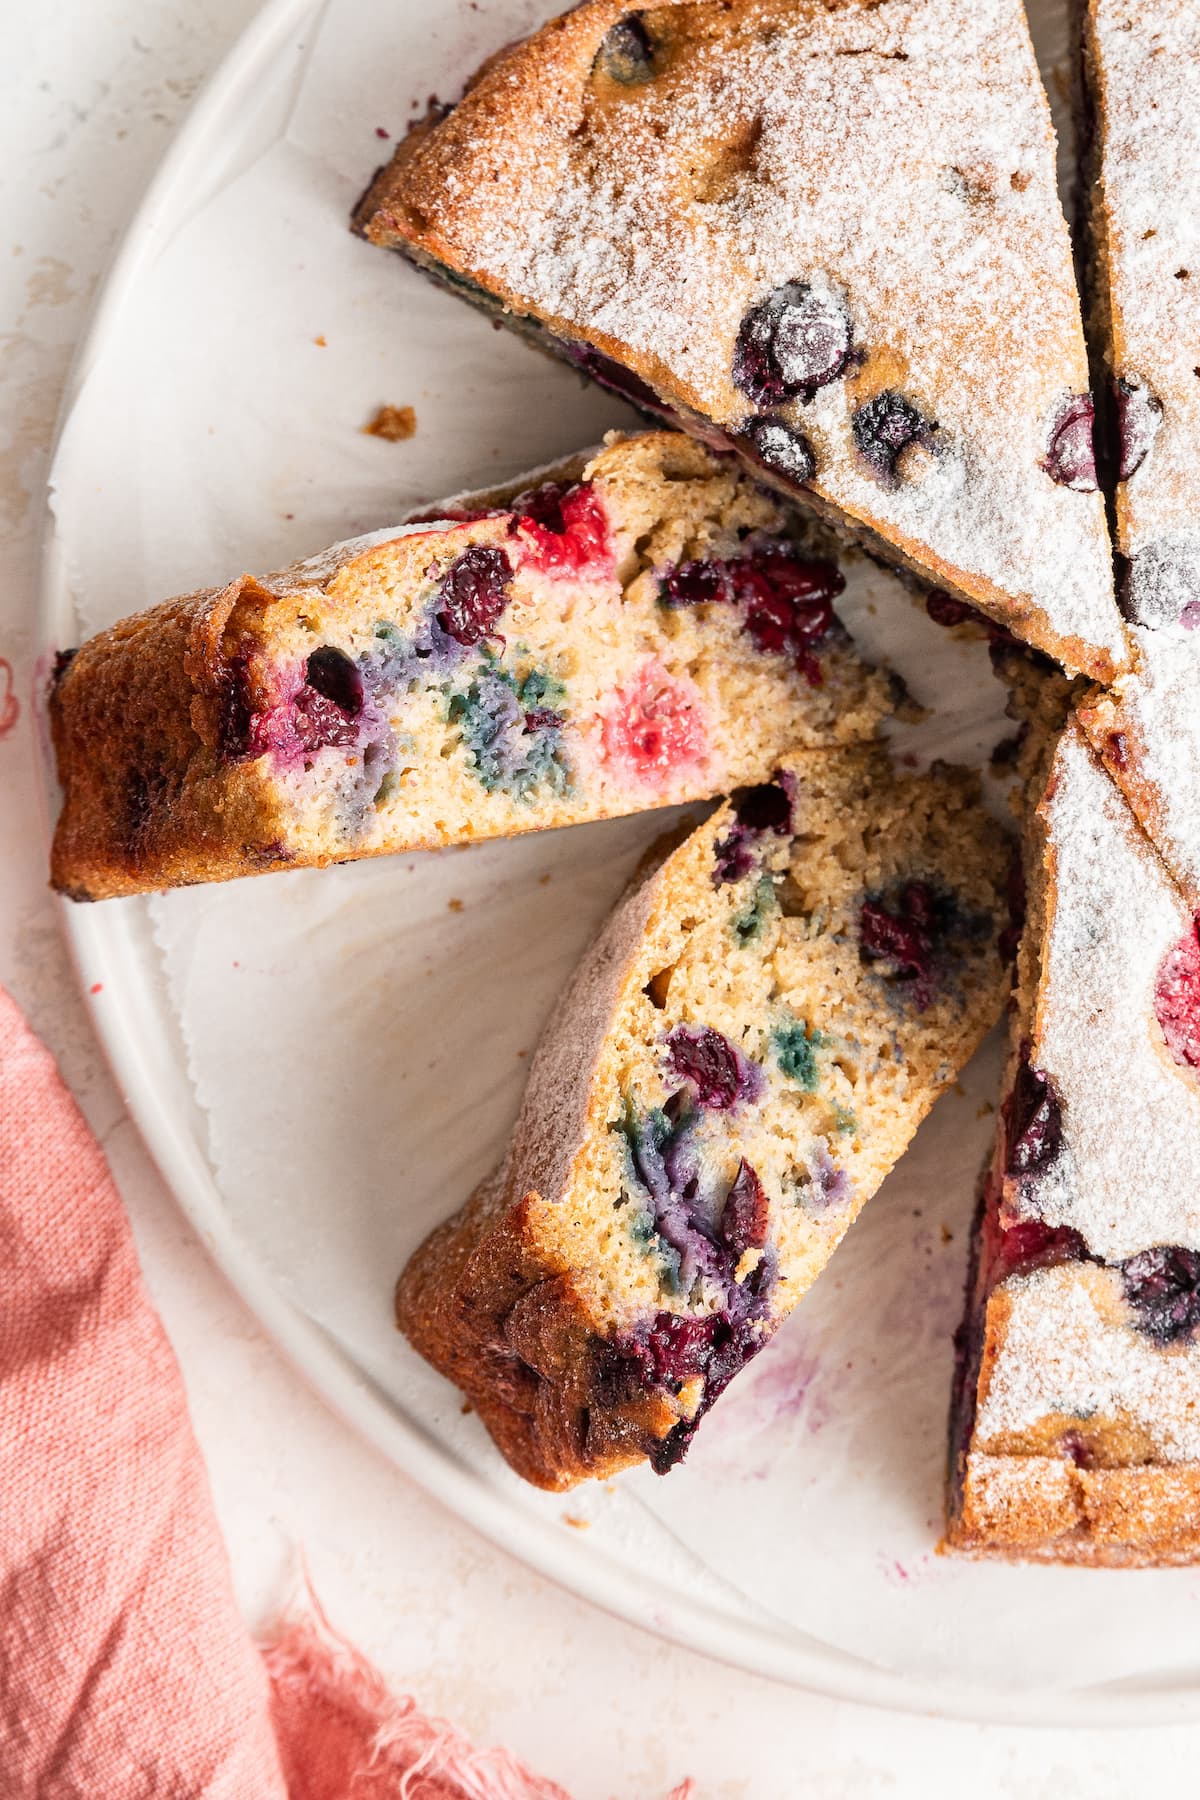 Slices of easy berry cake on their side.